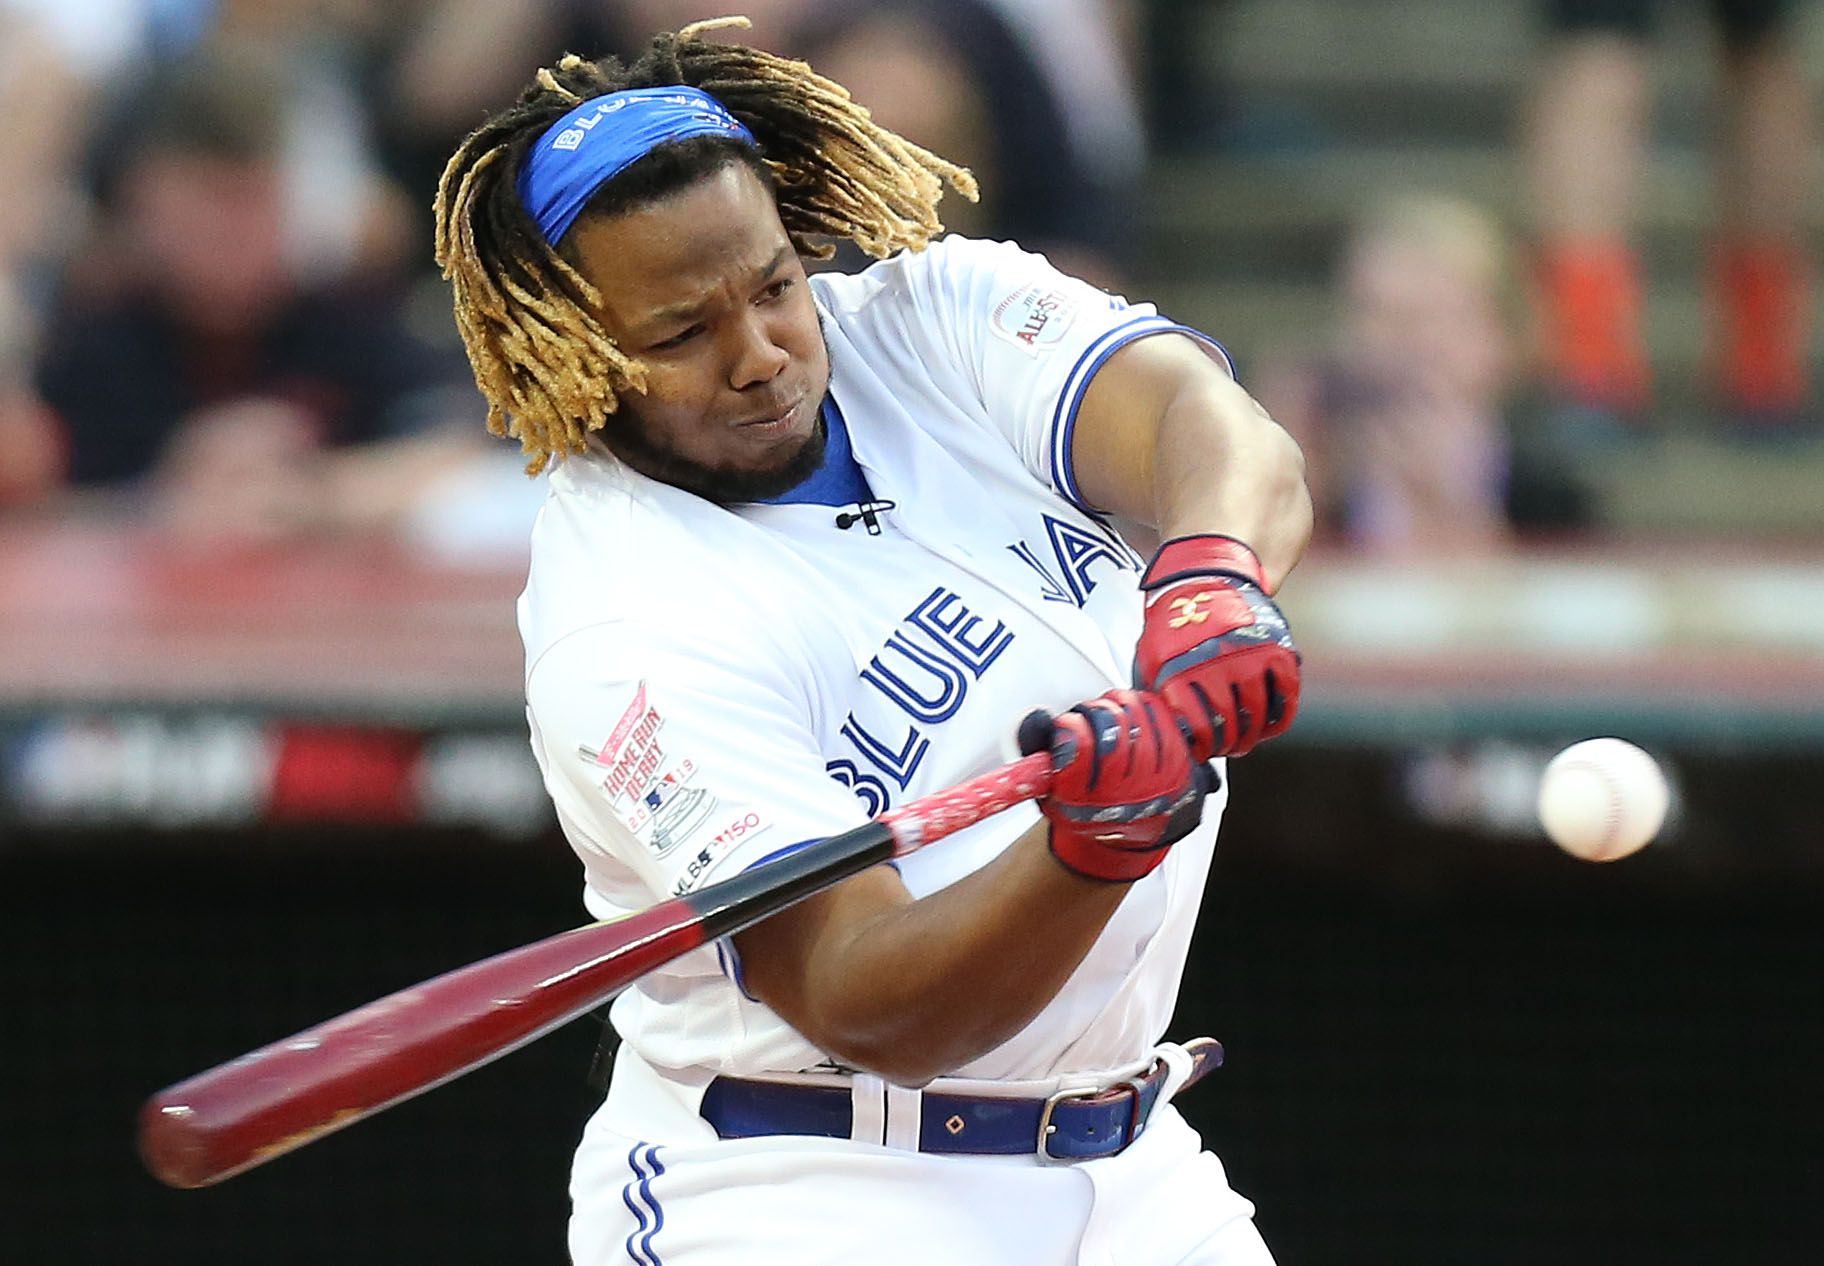 Terry Francona was impressed by Vladimir Guerrero Jr's endurance, poise in  historic home run derby effort 